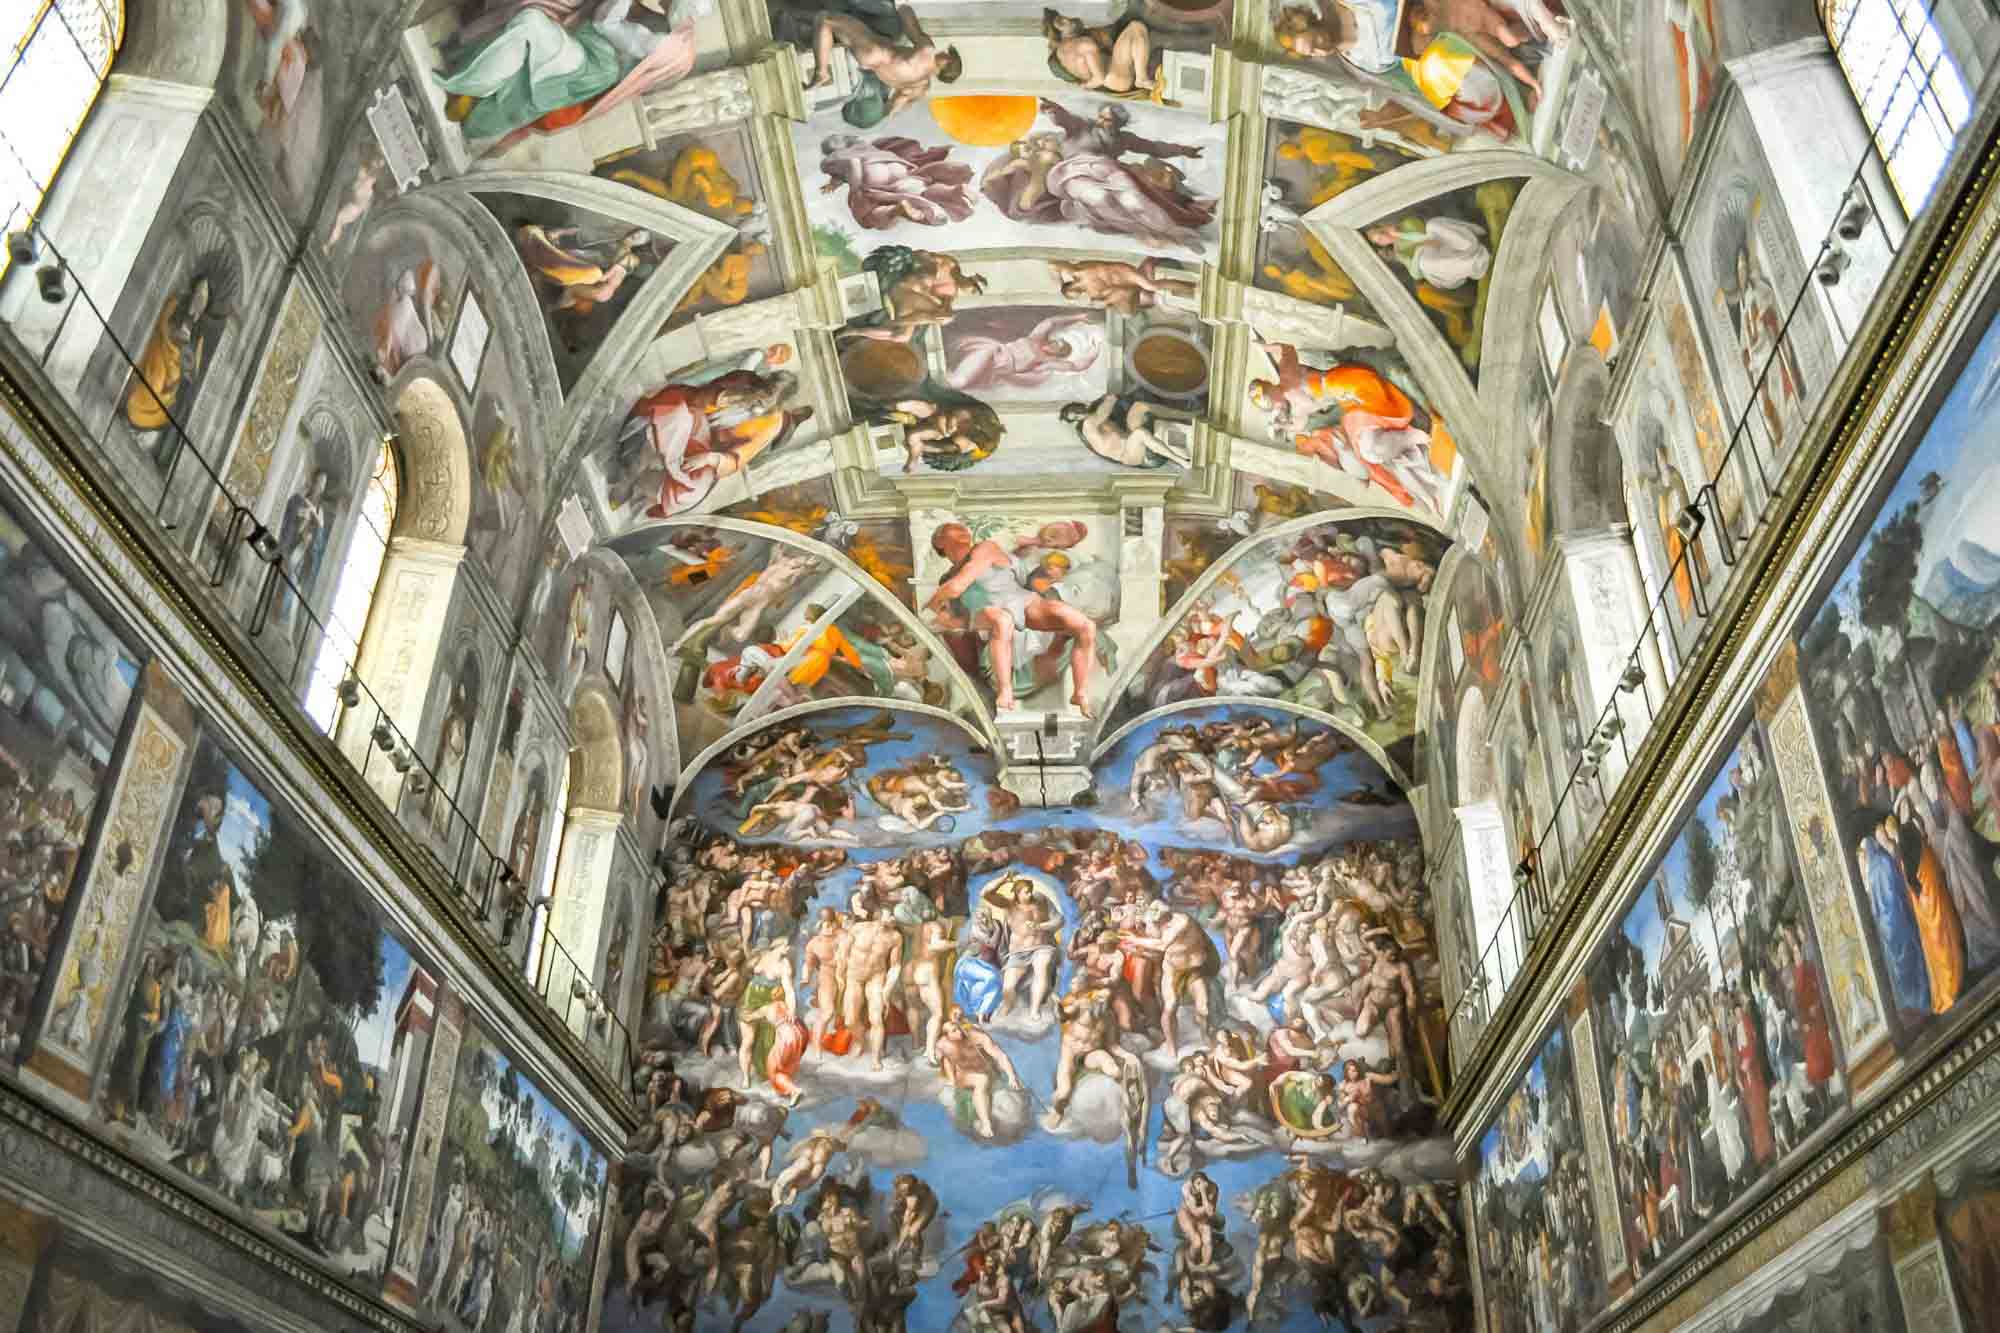 Painted ceiling of the Sistine Chapel